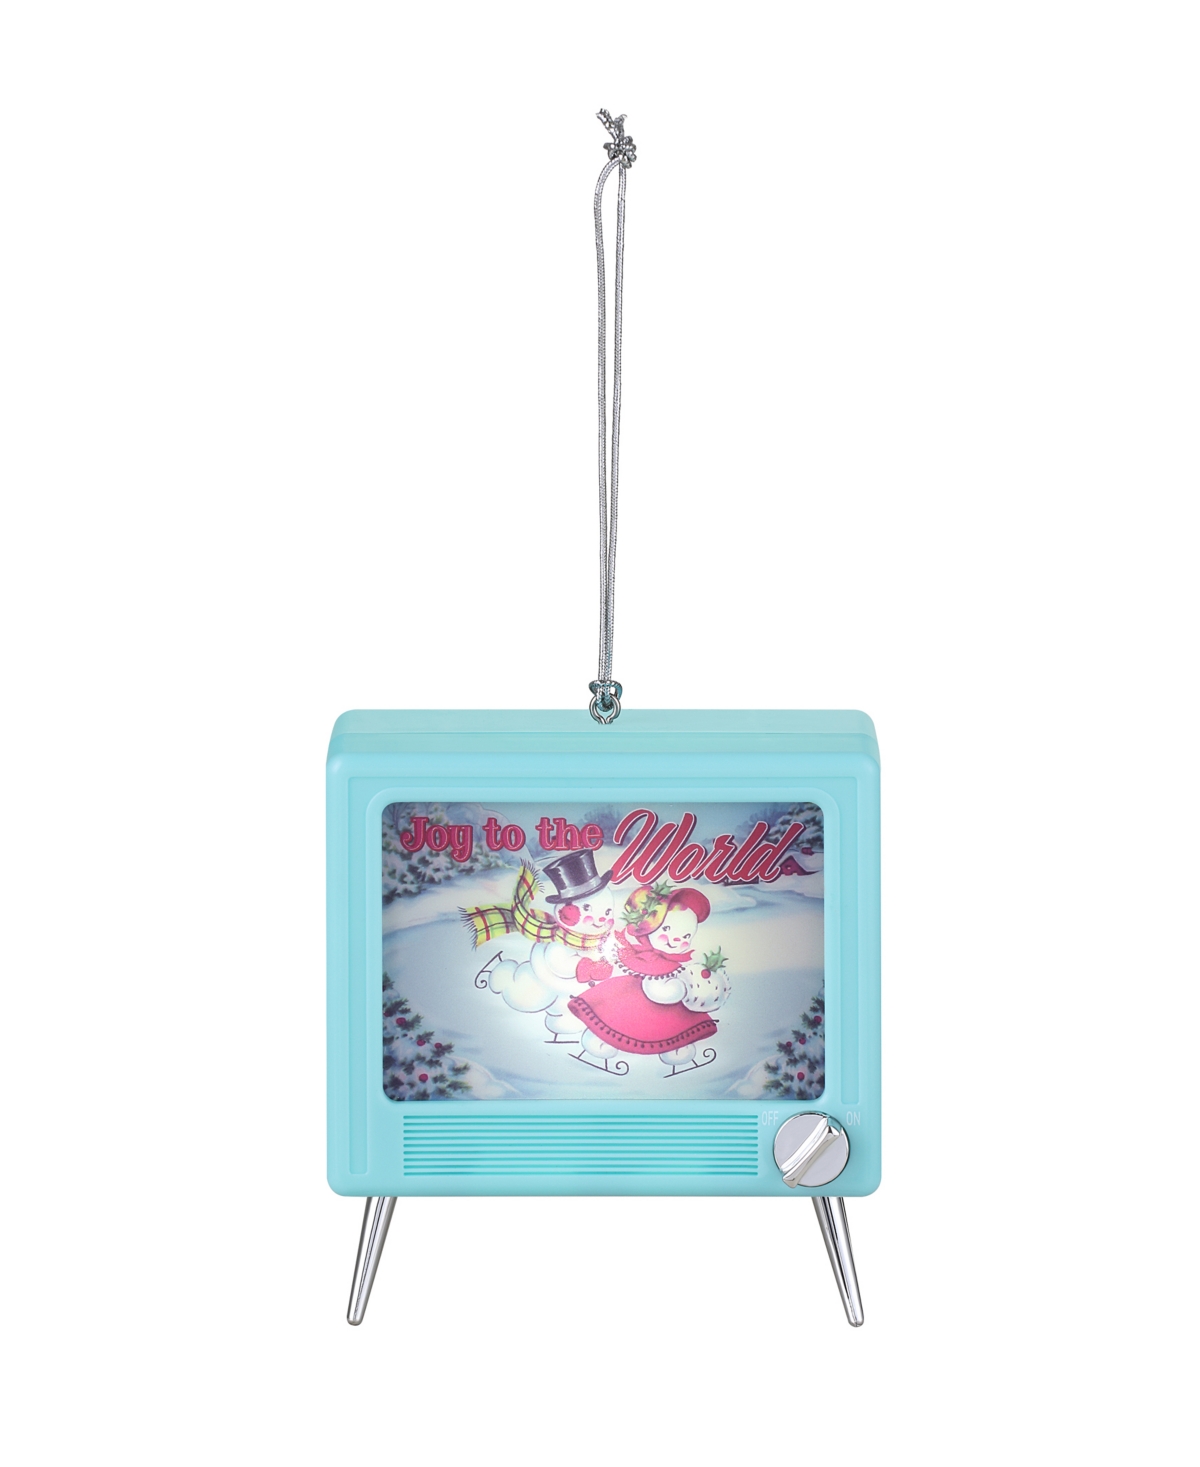 Mr. Christmas 3.75" Musical Led Tv Ornament In Teal